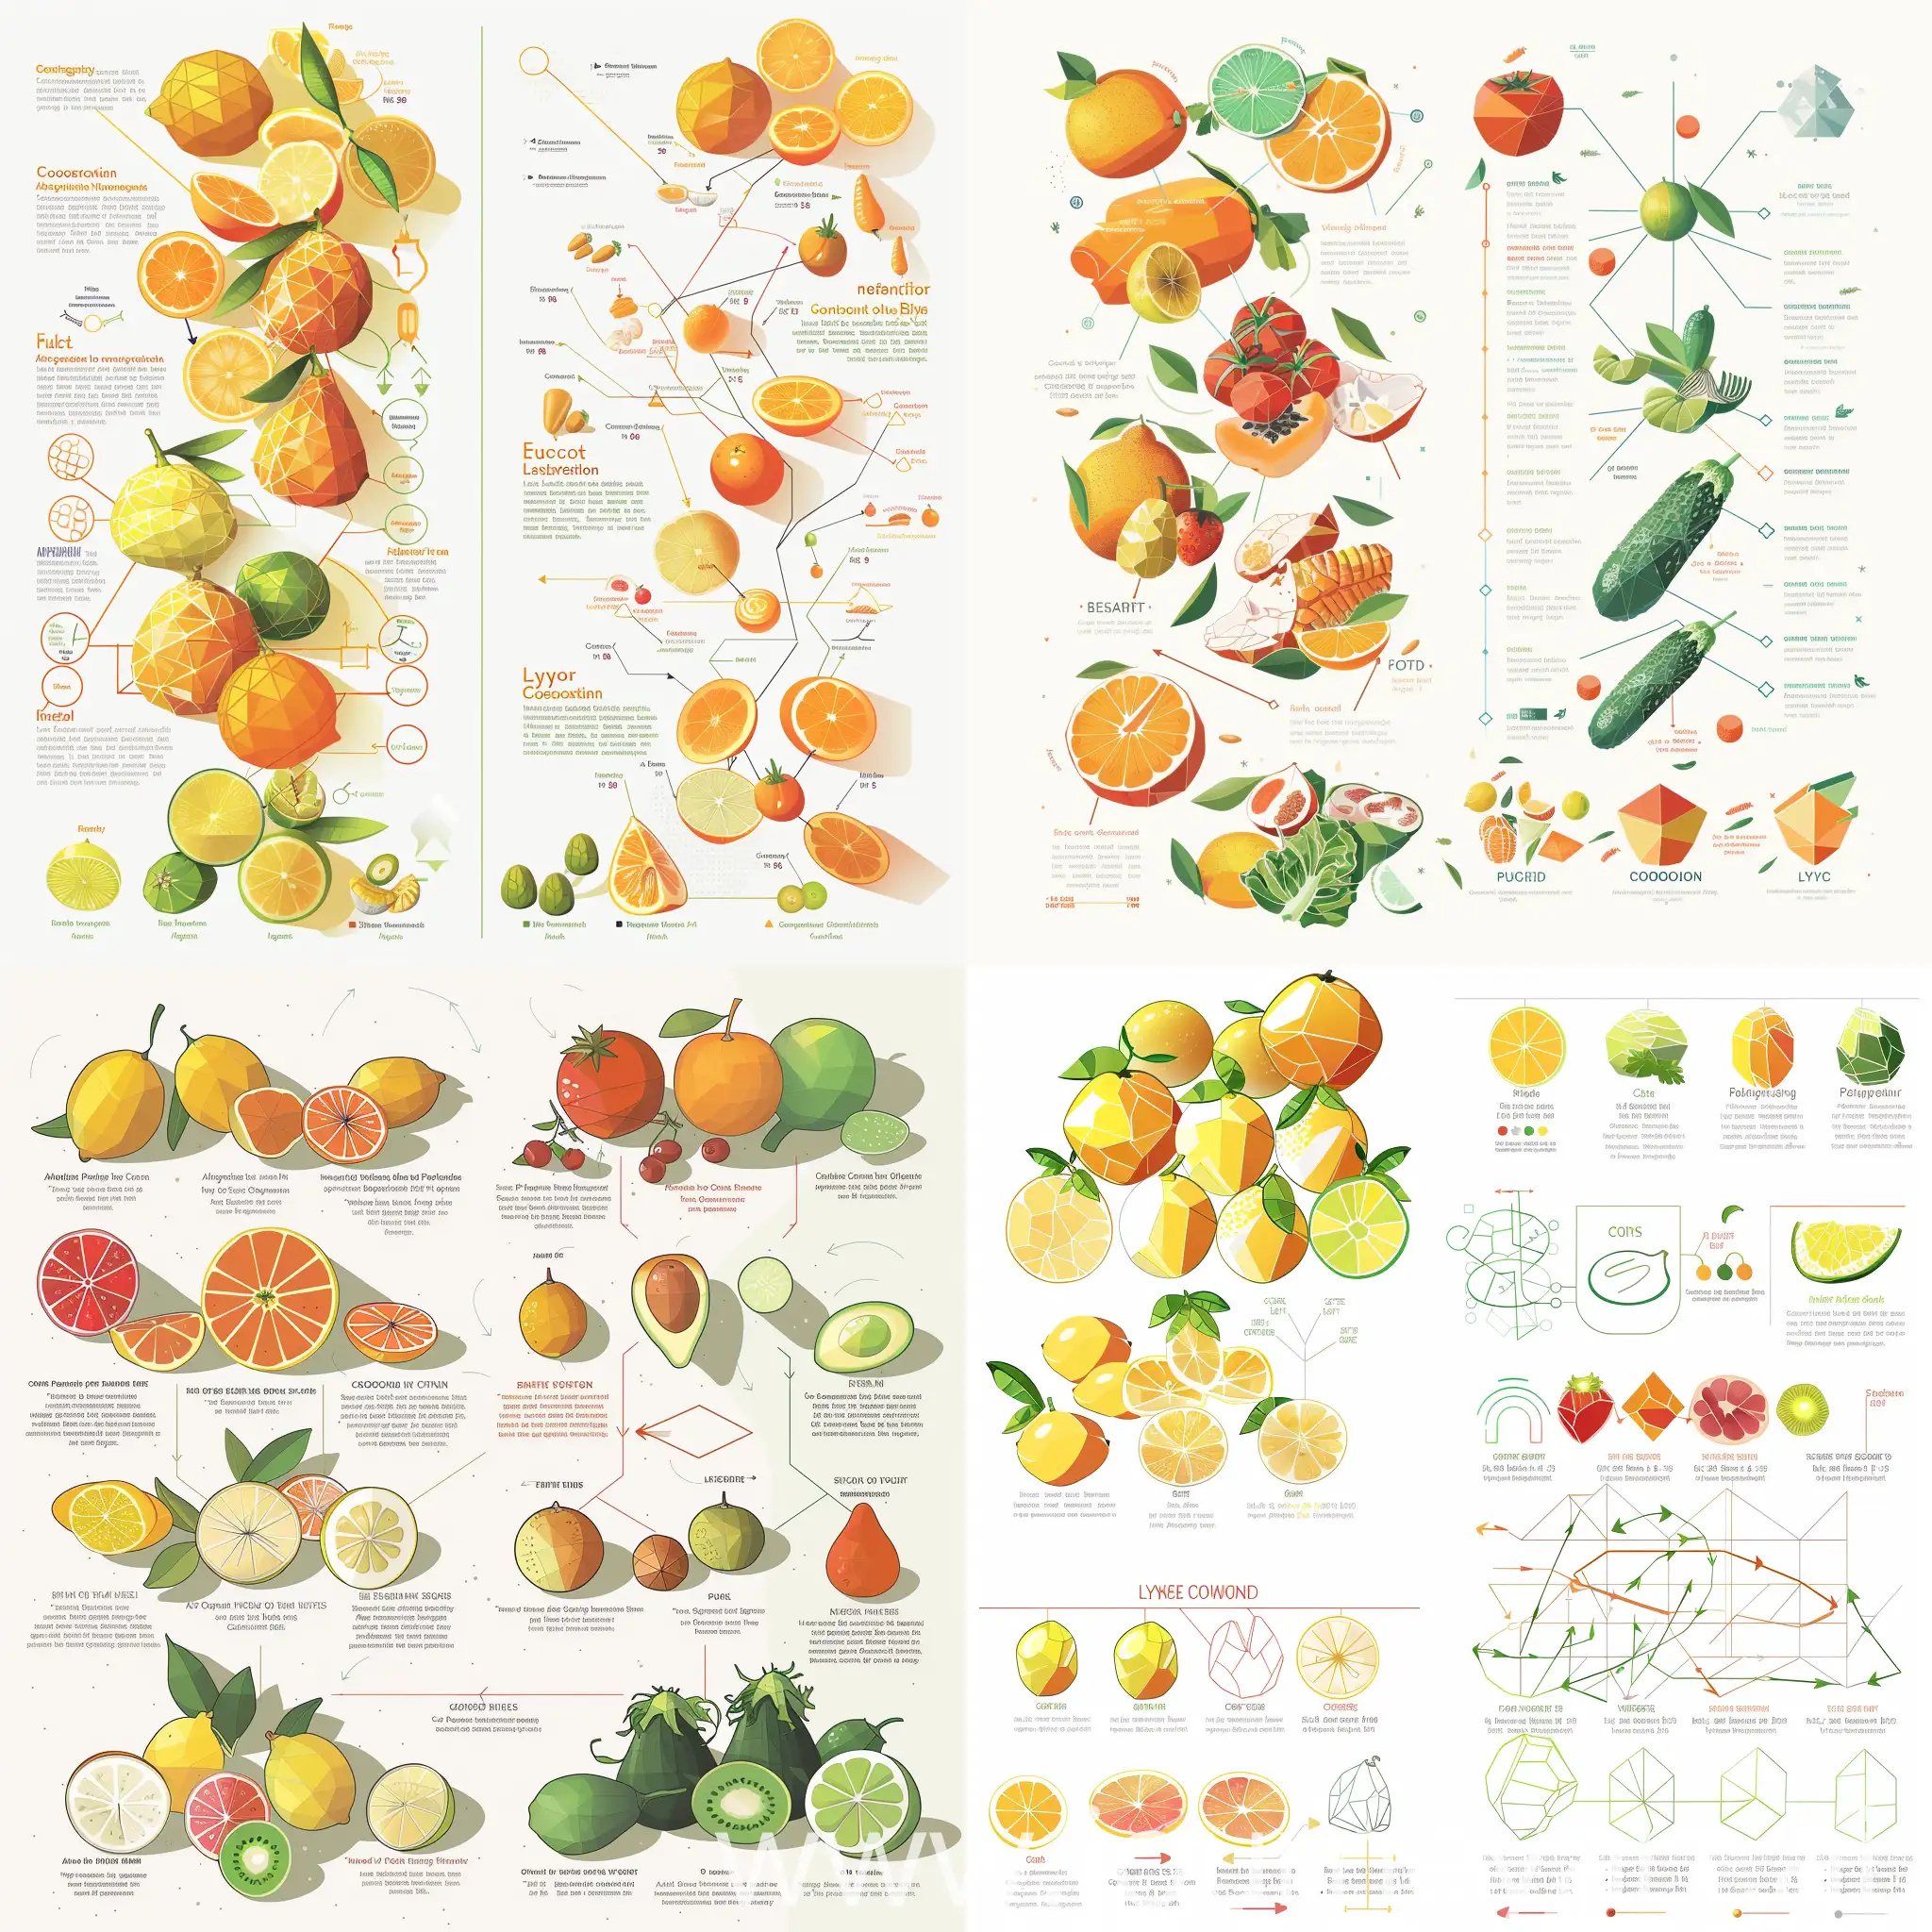 NutrientRich-Foods-Citrus-Fruits-and-CarotenoidRich-Vegetables-Illustrated